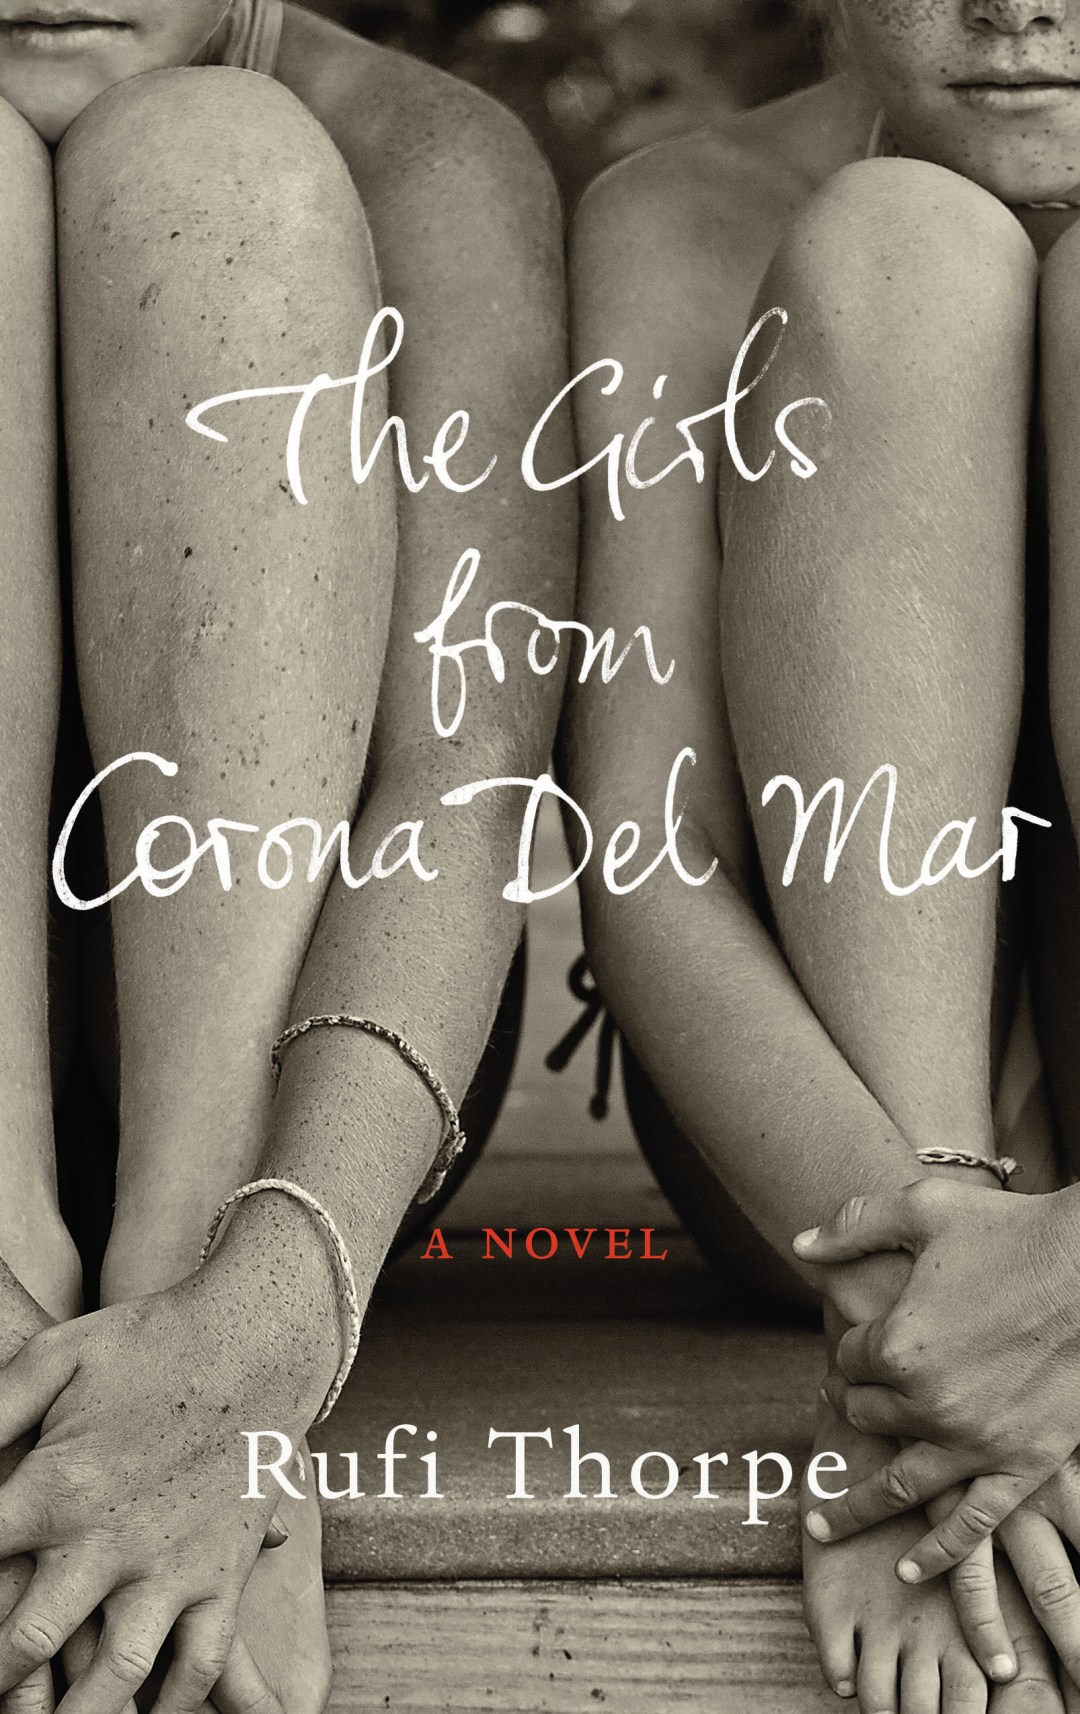 Paperback pick: The Girls From Corona Del Mar